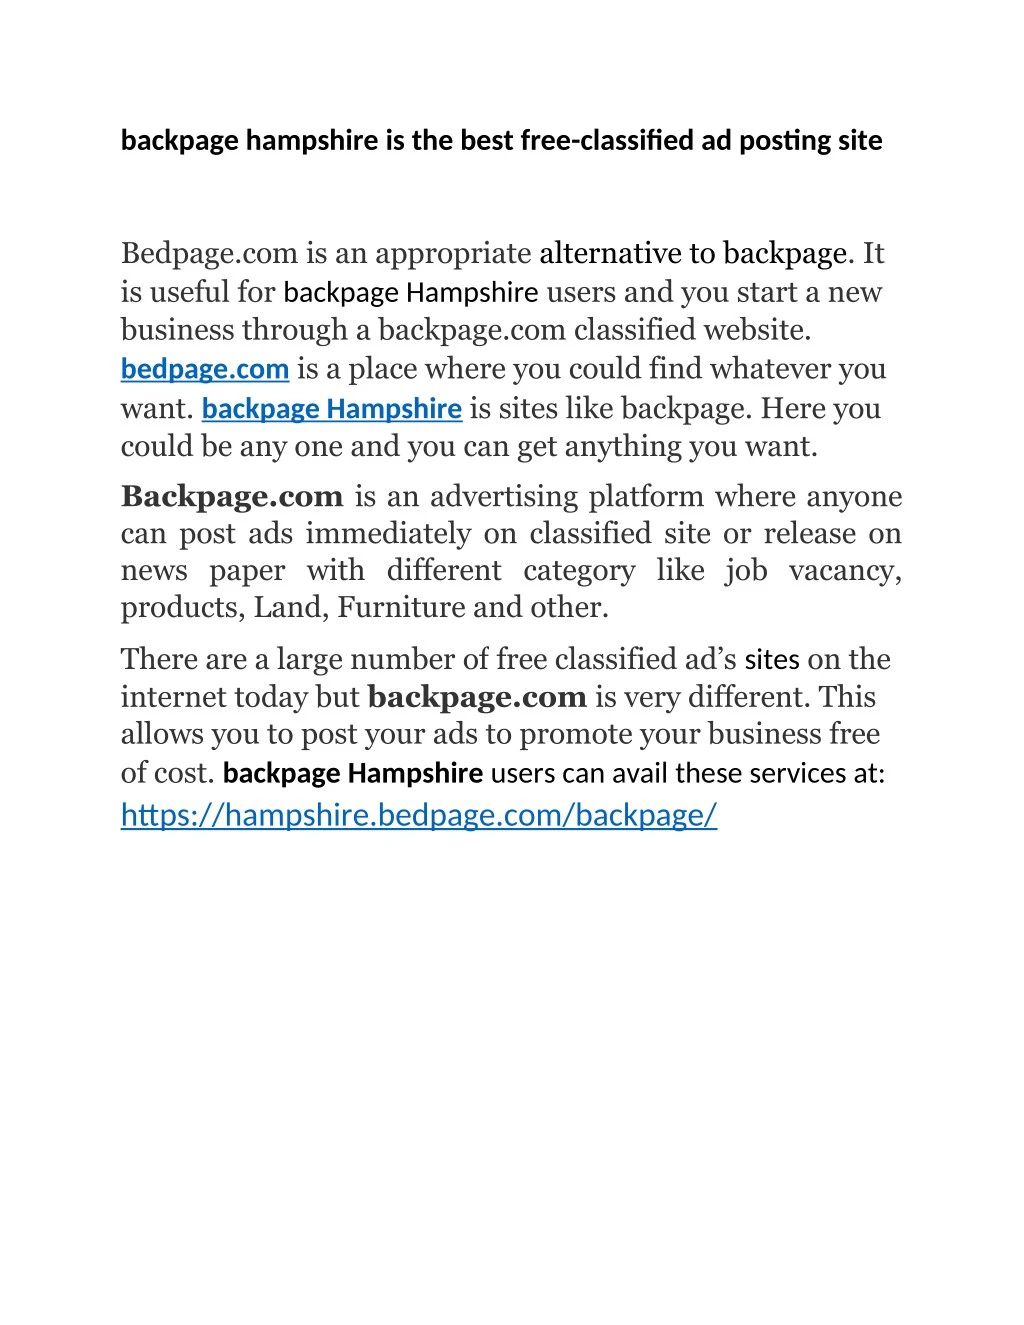 backpage hampshire is the best free classified